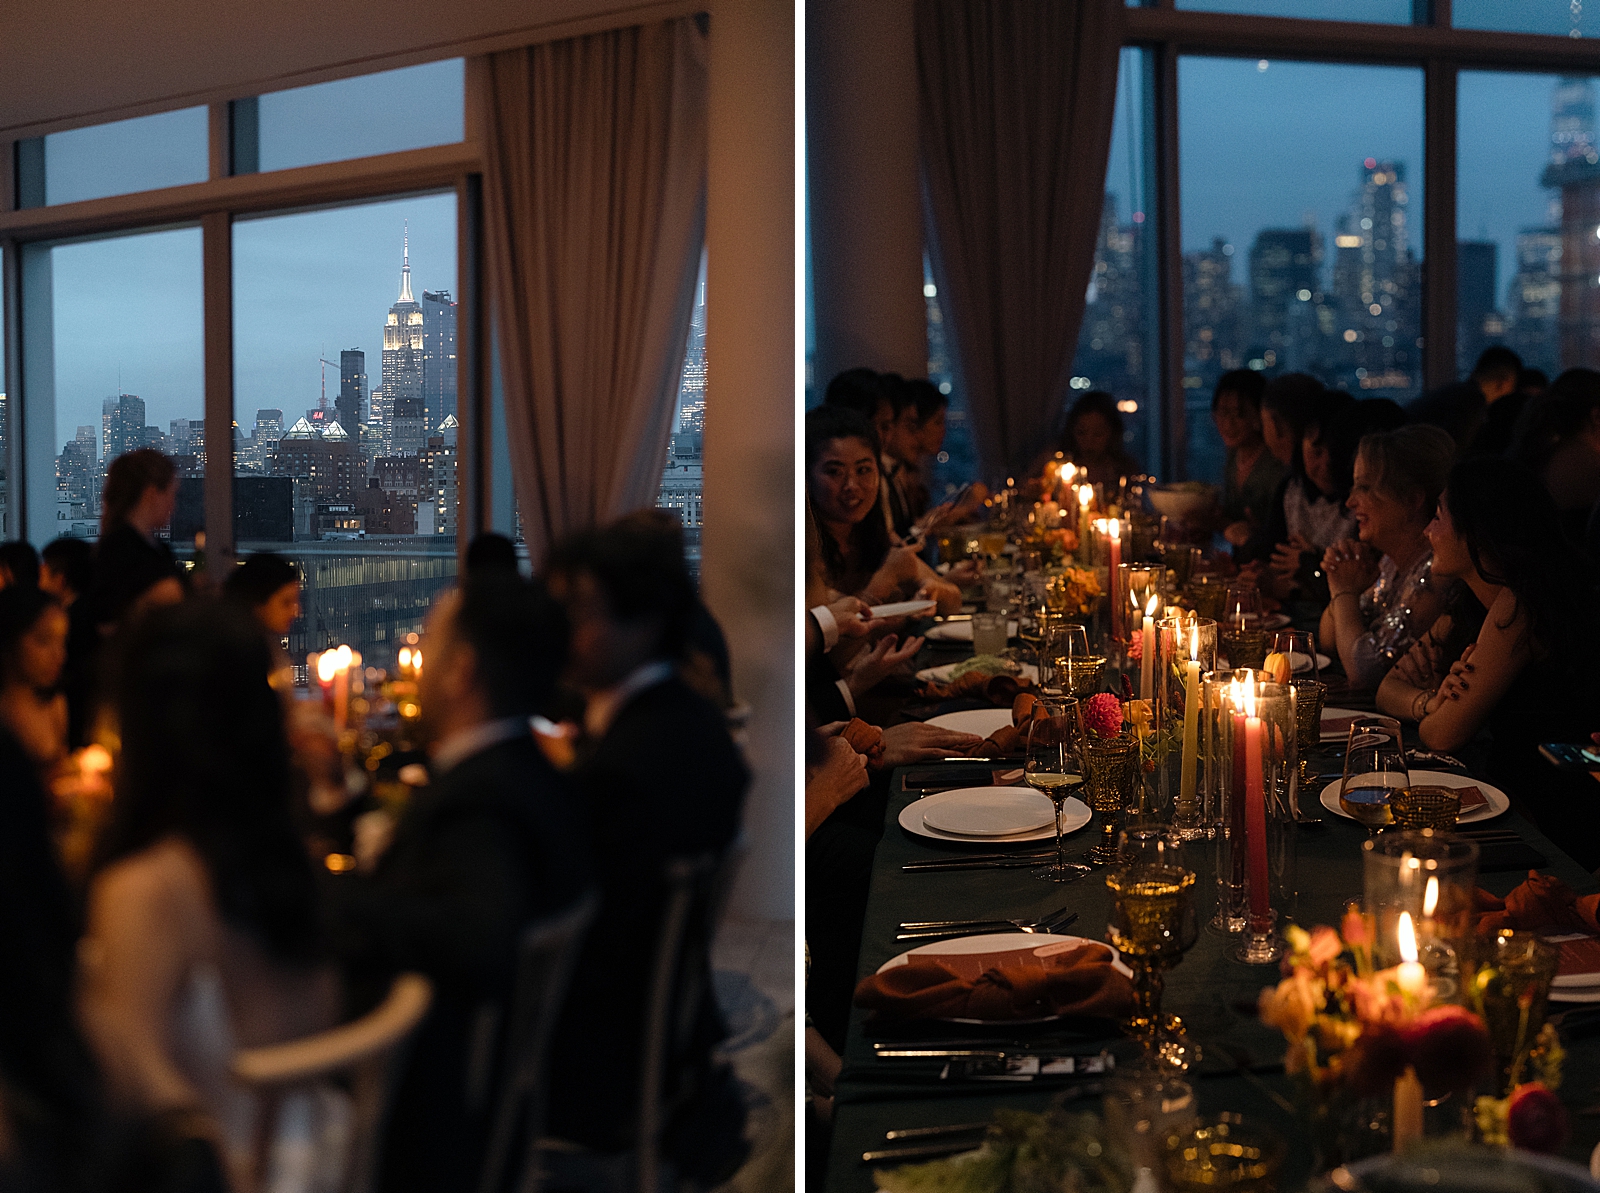 Left photo: Shot of the wedding guests sitting down for a candlelit dinner.
Right photo: Shot of the wedding guests sitting down for a candlelit dinner.